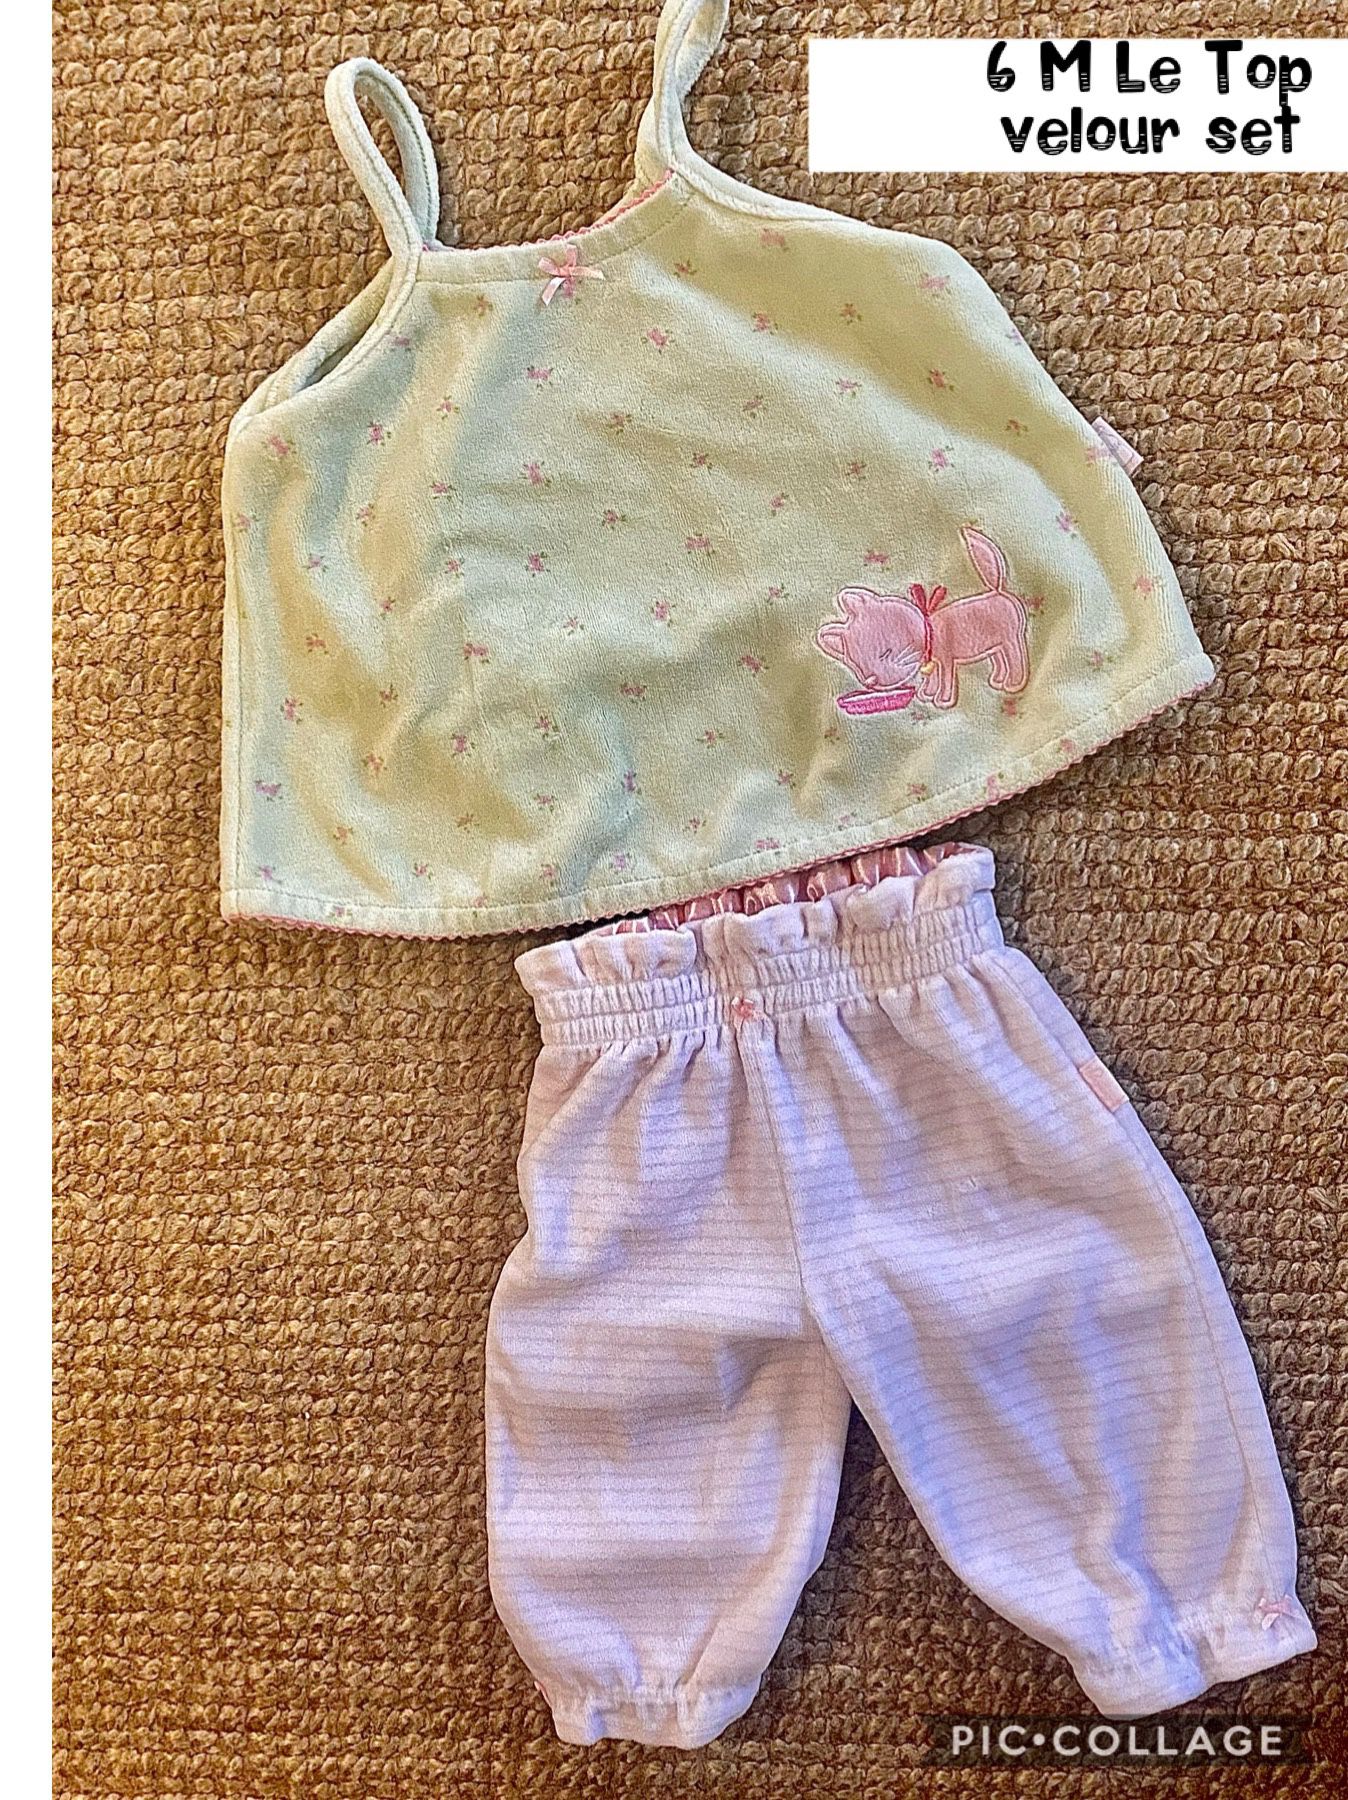 6 M Le Top velour set so soft, pink stripe, comfy bottoms, peel green kitten, rose bed swing top just add turtleneck or onesie nice and warm